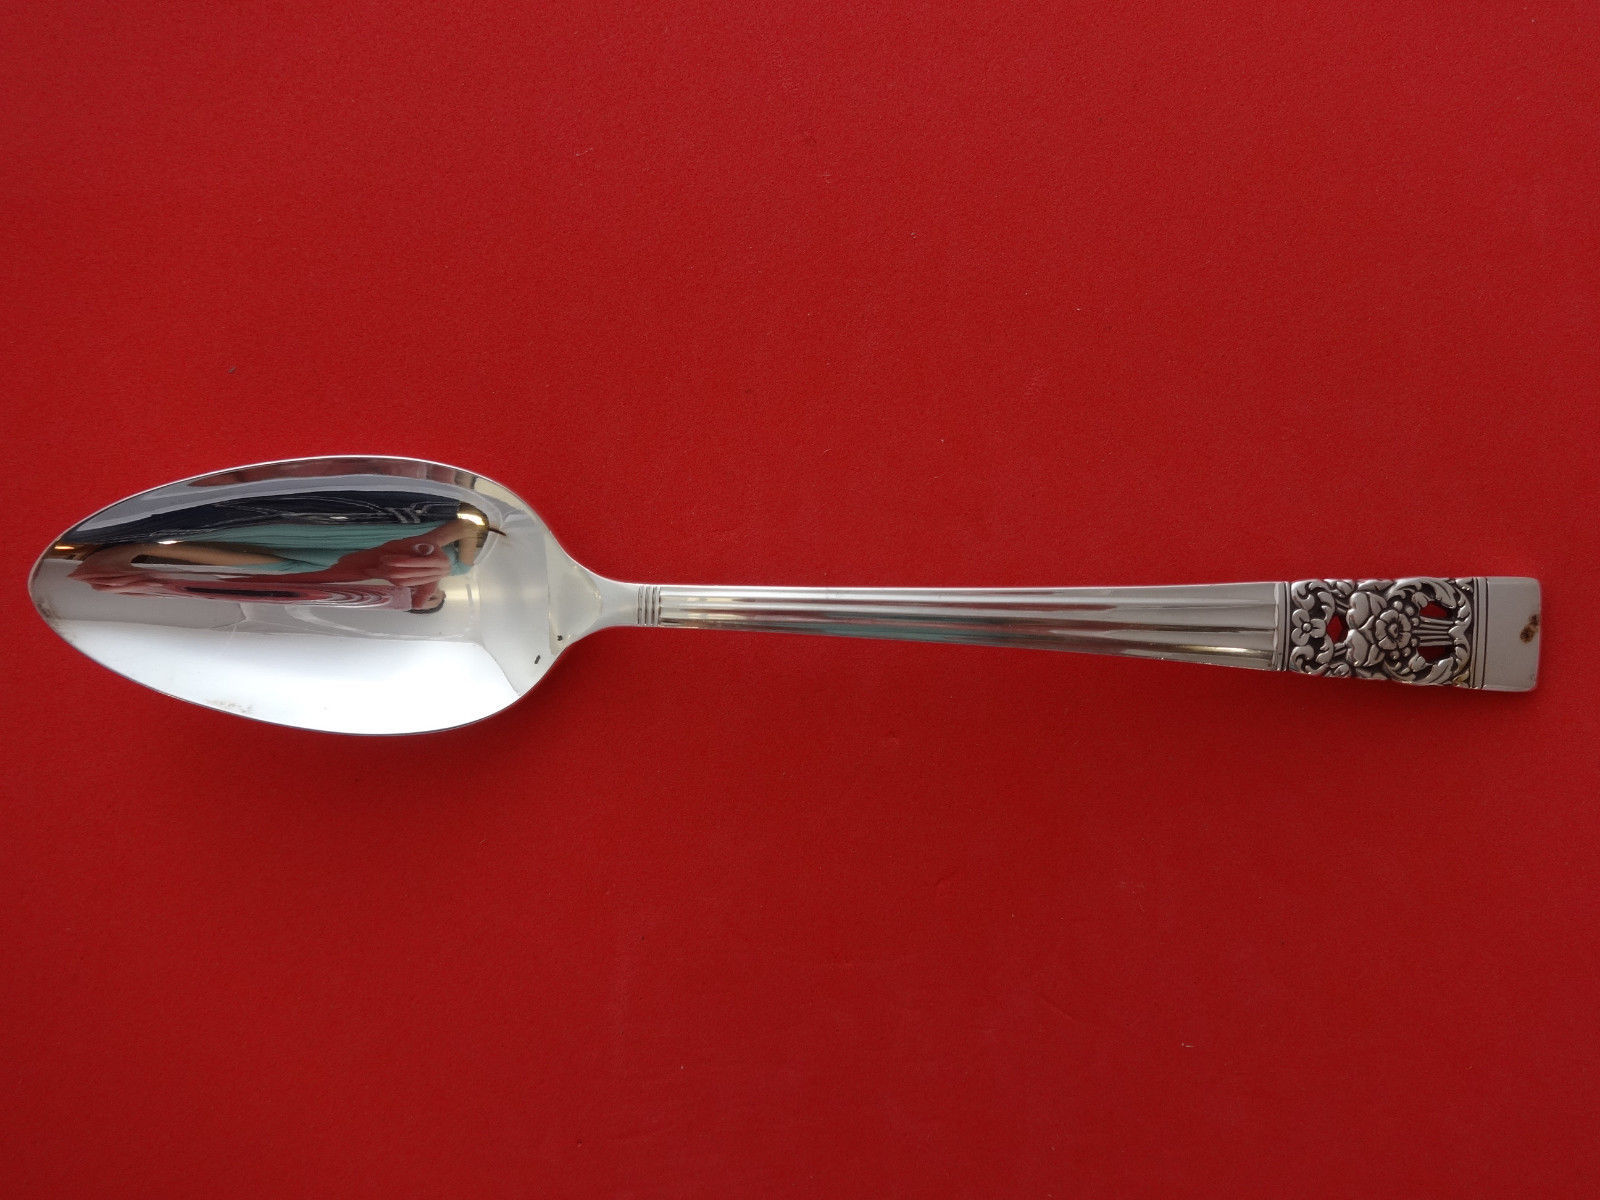 Wapw gt. britain silver plated spoon